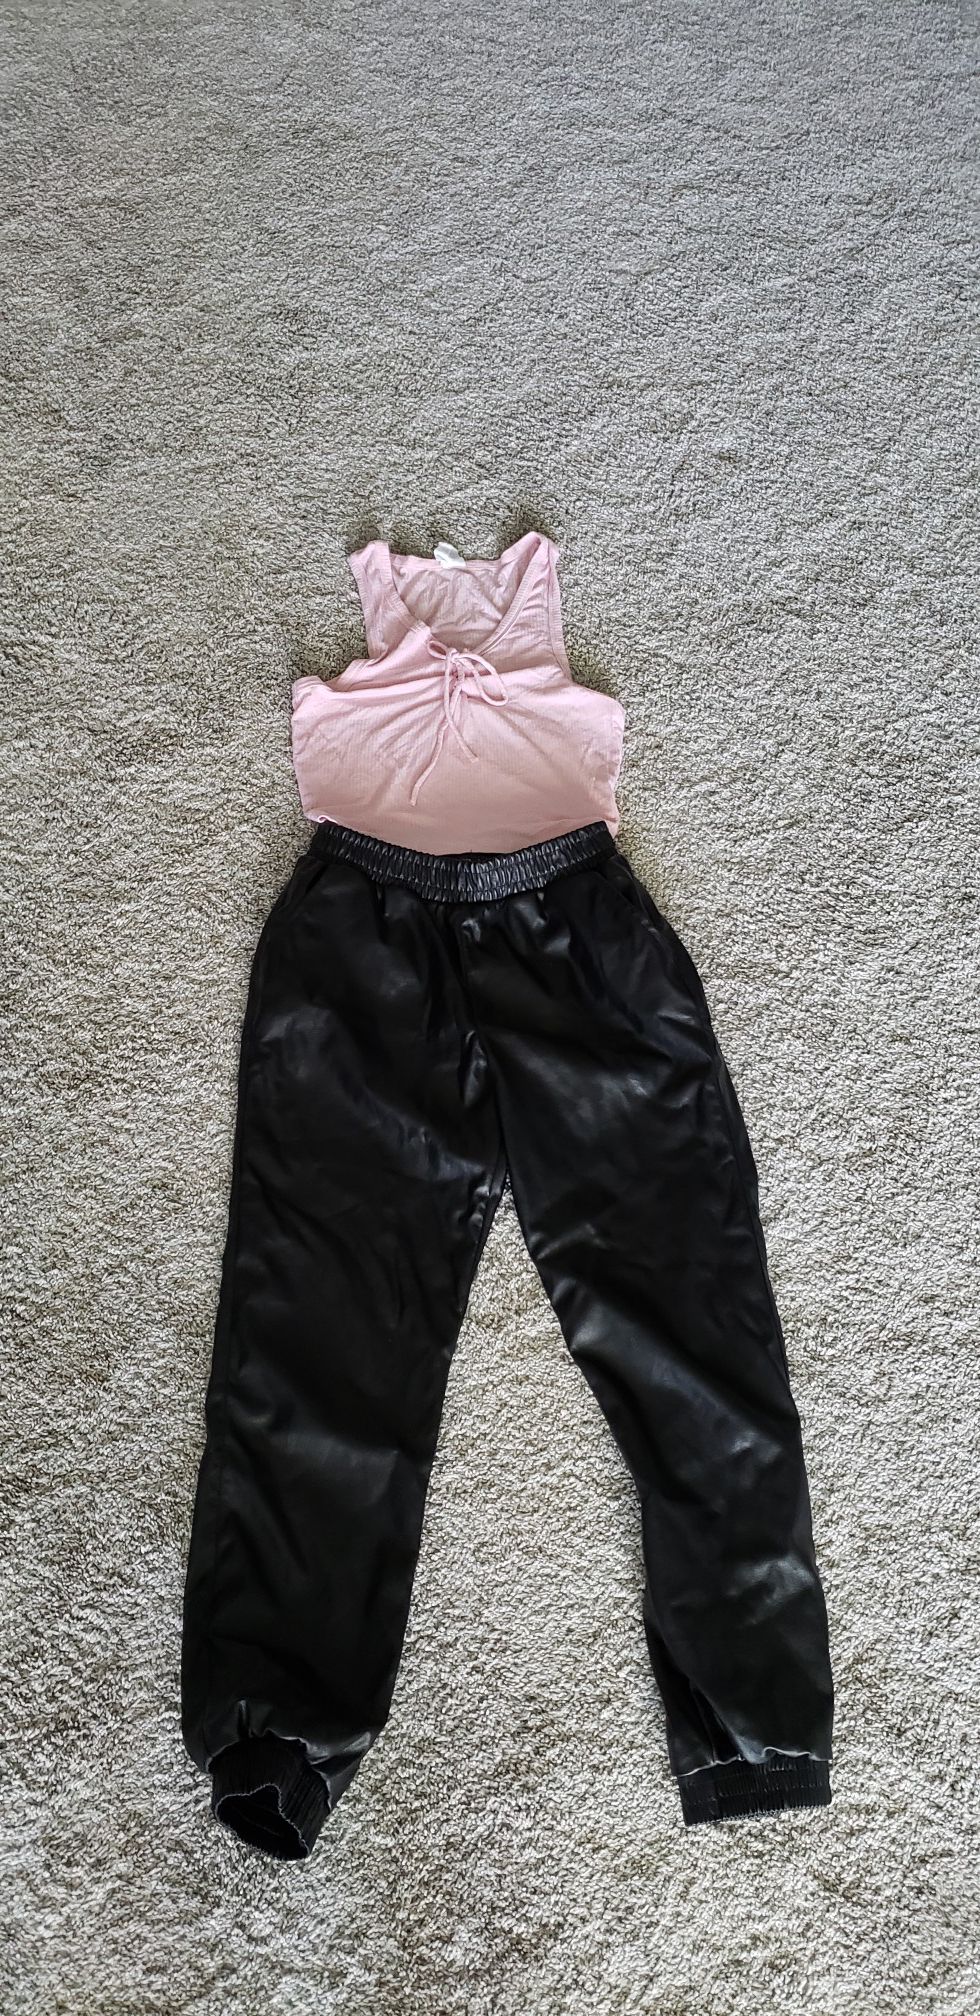 women's clothing size S/15 $ all